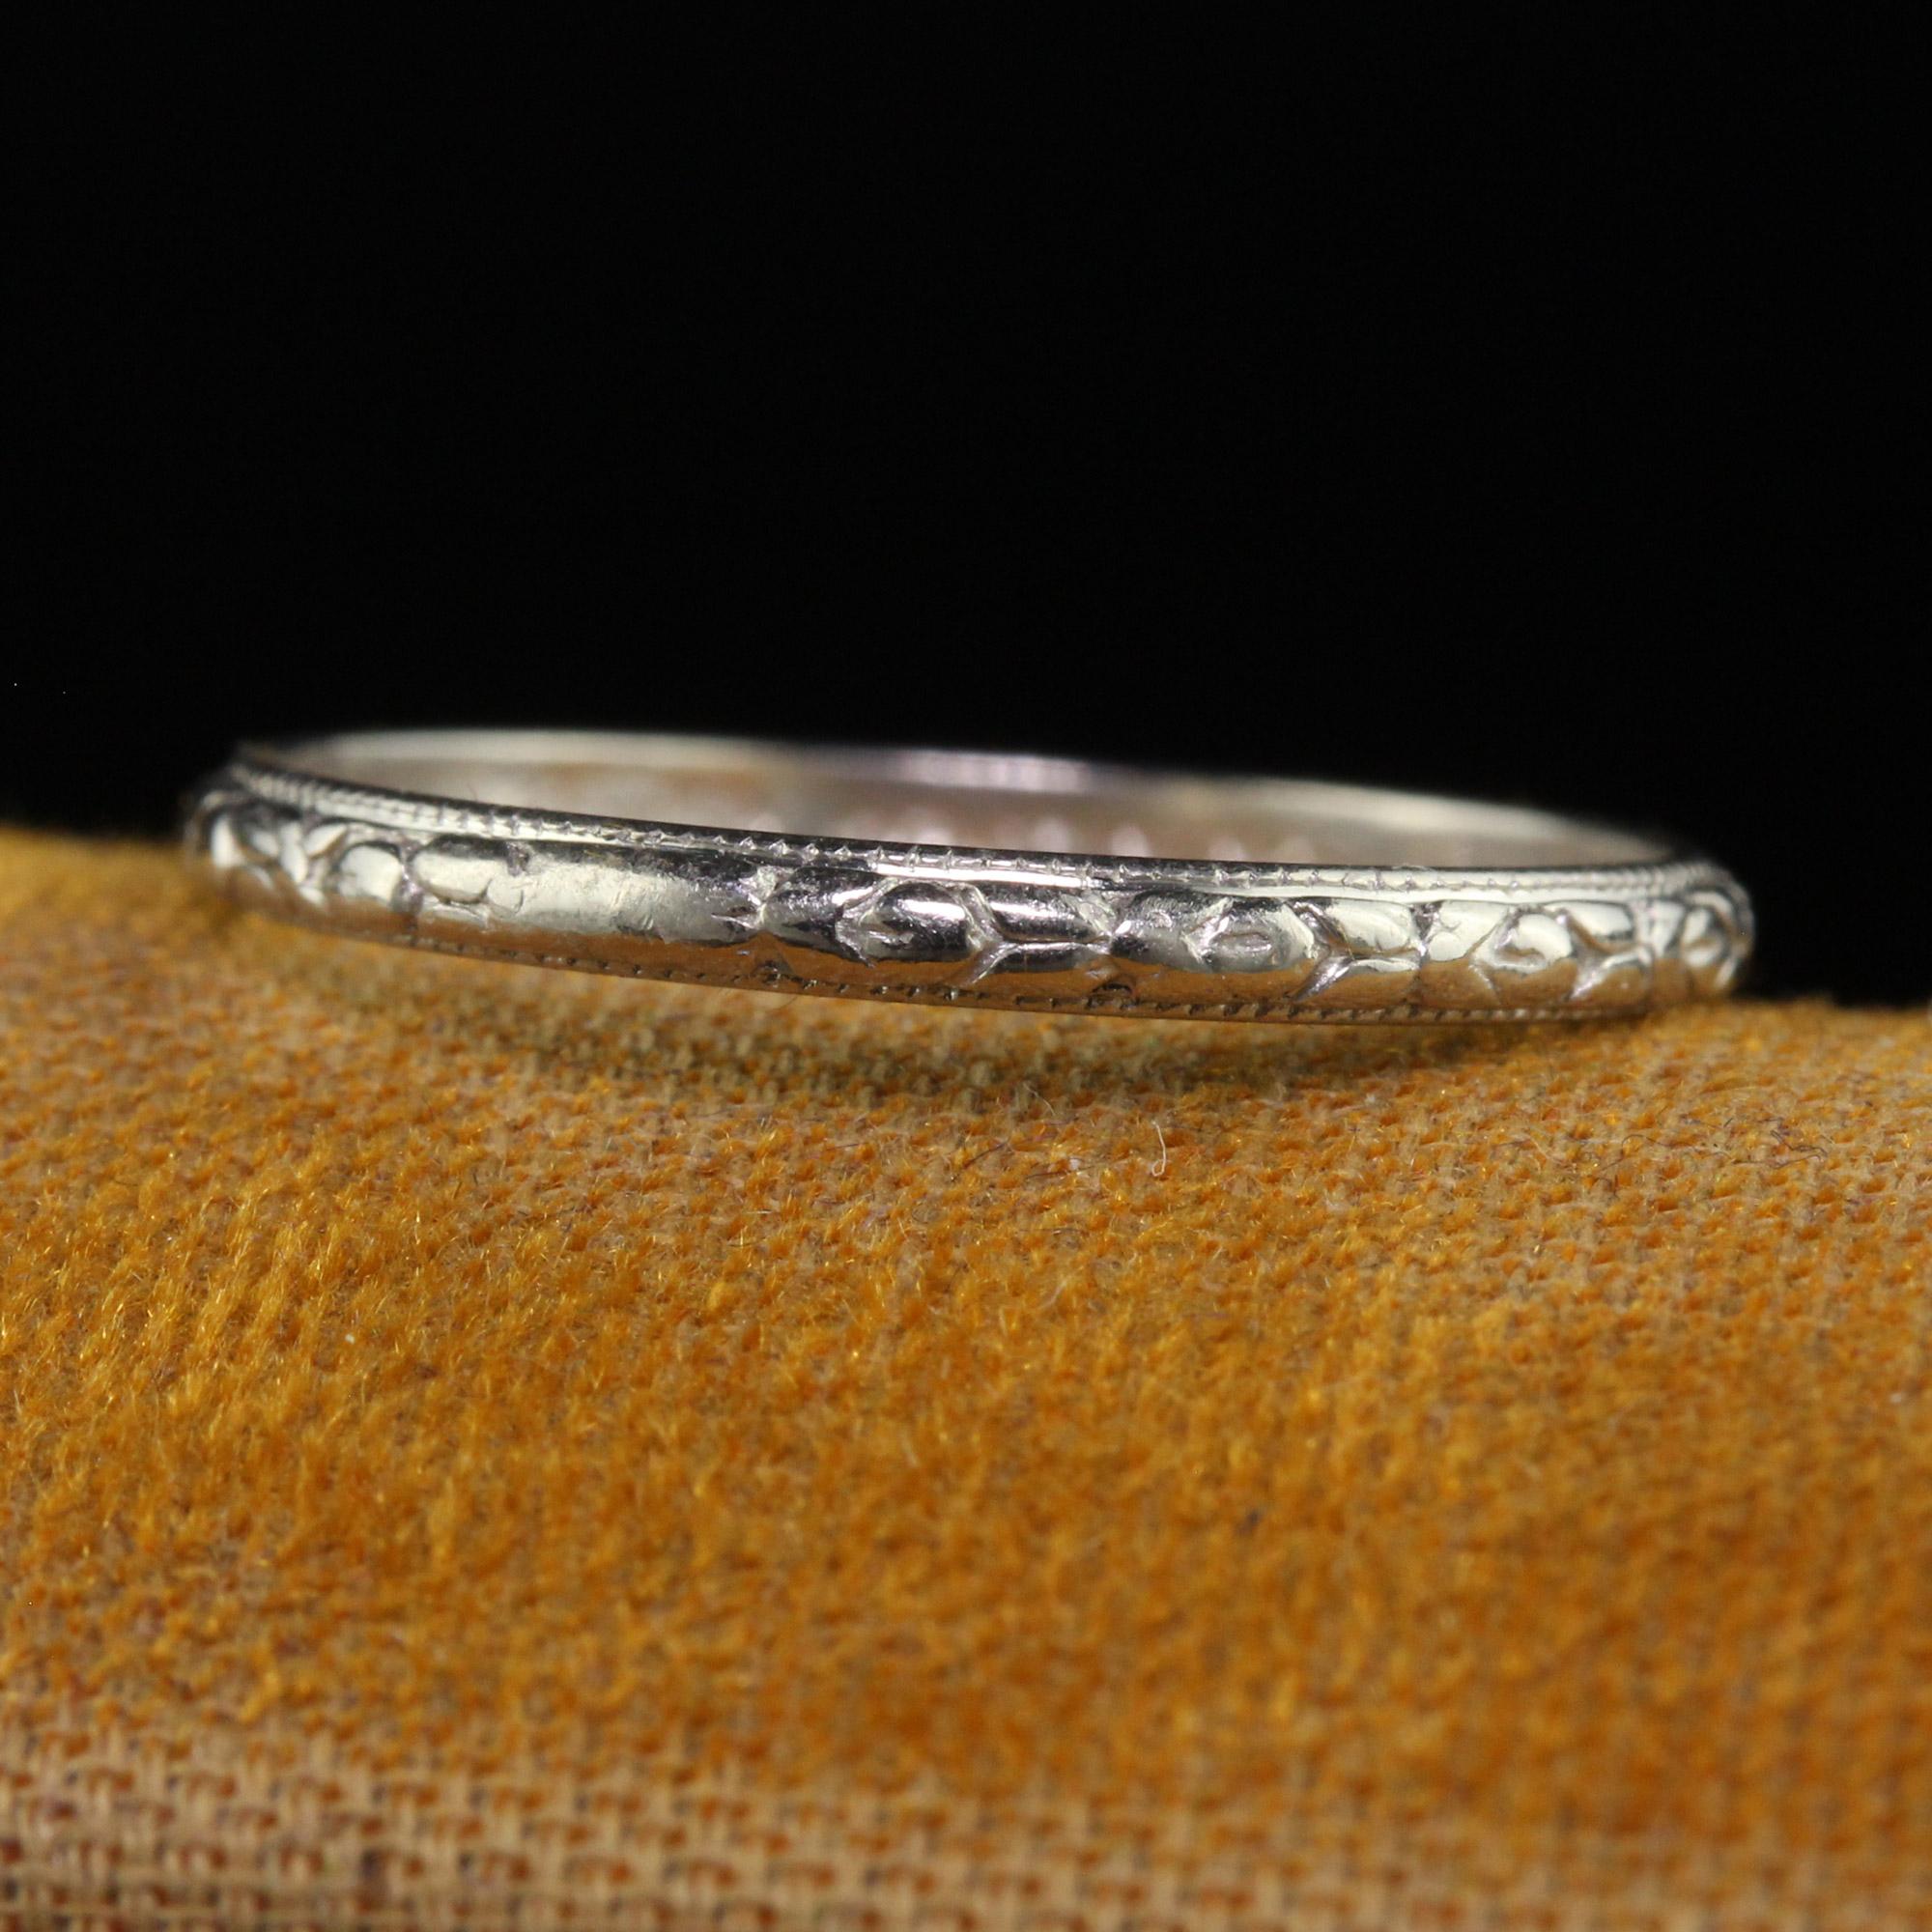 Beautiful Antique Art Deco Platinum Engraved Certified Wedding Band - Size 6. This gorgeous antique art deco wedding band is crafted in platinum. The ring has beautiful engravings going around the entire ring. The inside of the shank is engraved